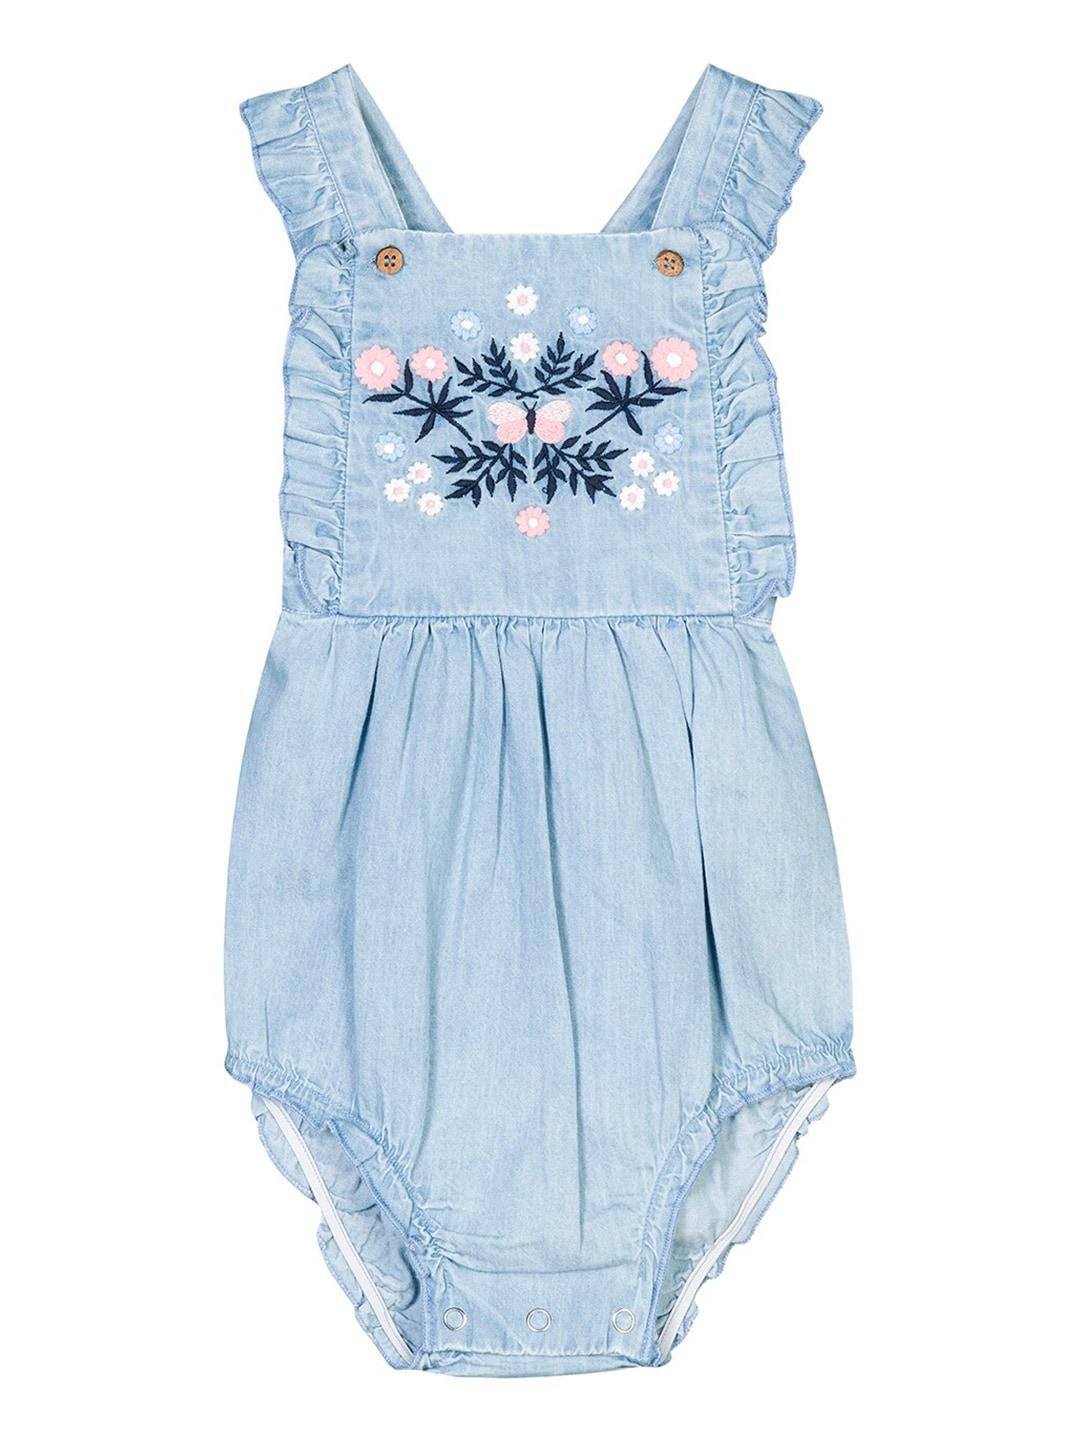 budding-bees-infant-girls-blue-denim-embroidered-rompers-with-ruffles-detail